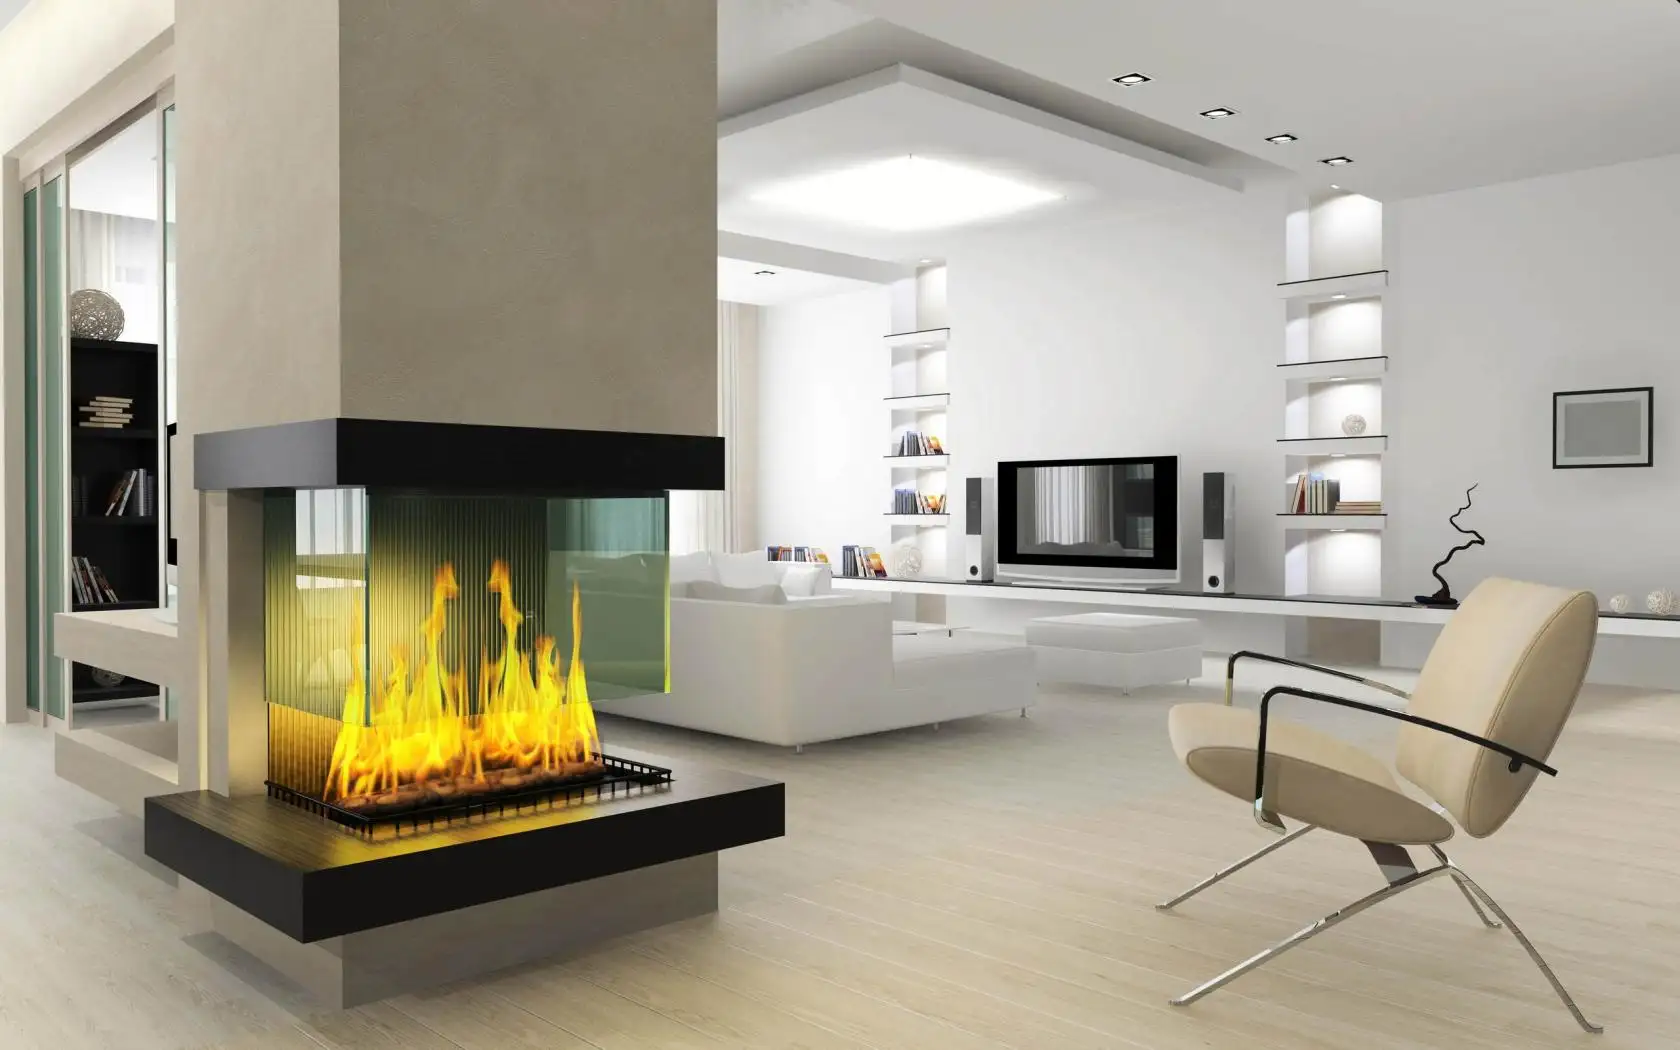 The Types of Fireplaces